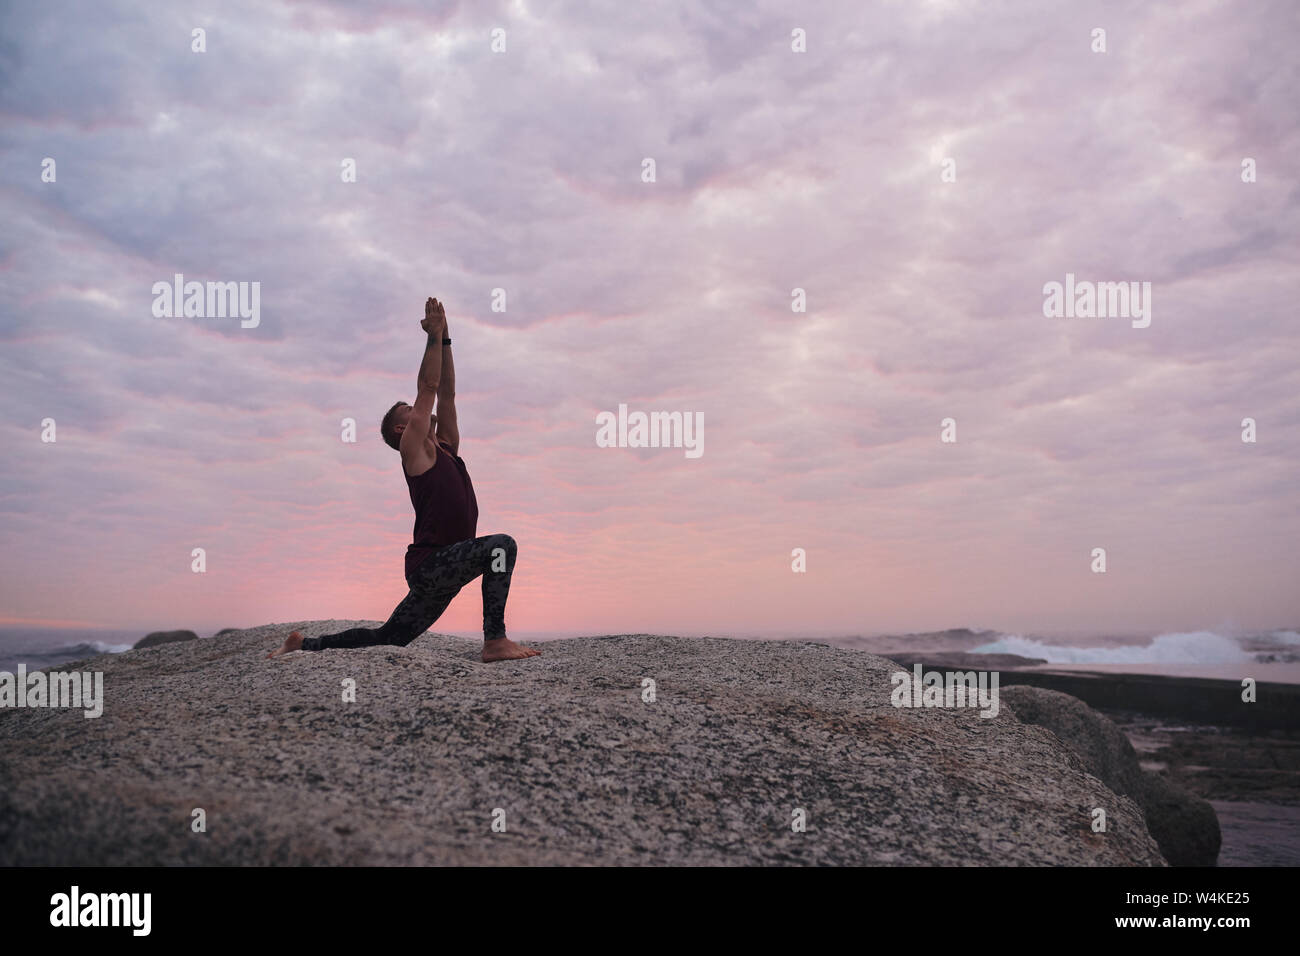 Man doing the cresent lunge pose by the ocean Stock Photo